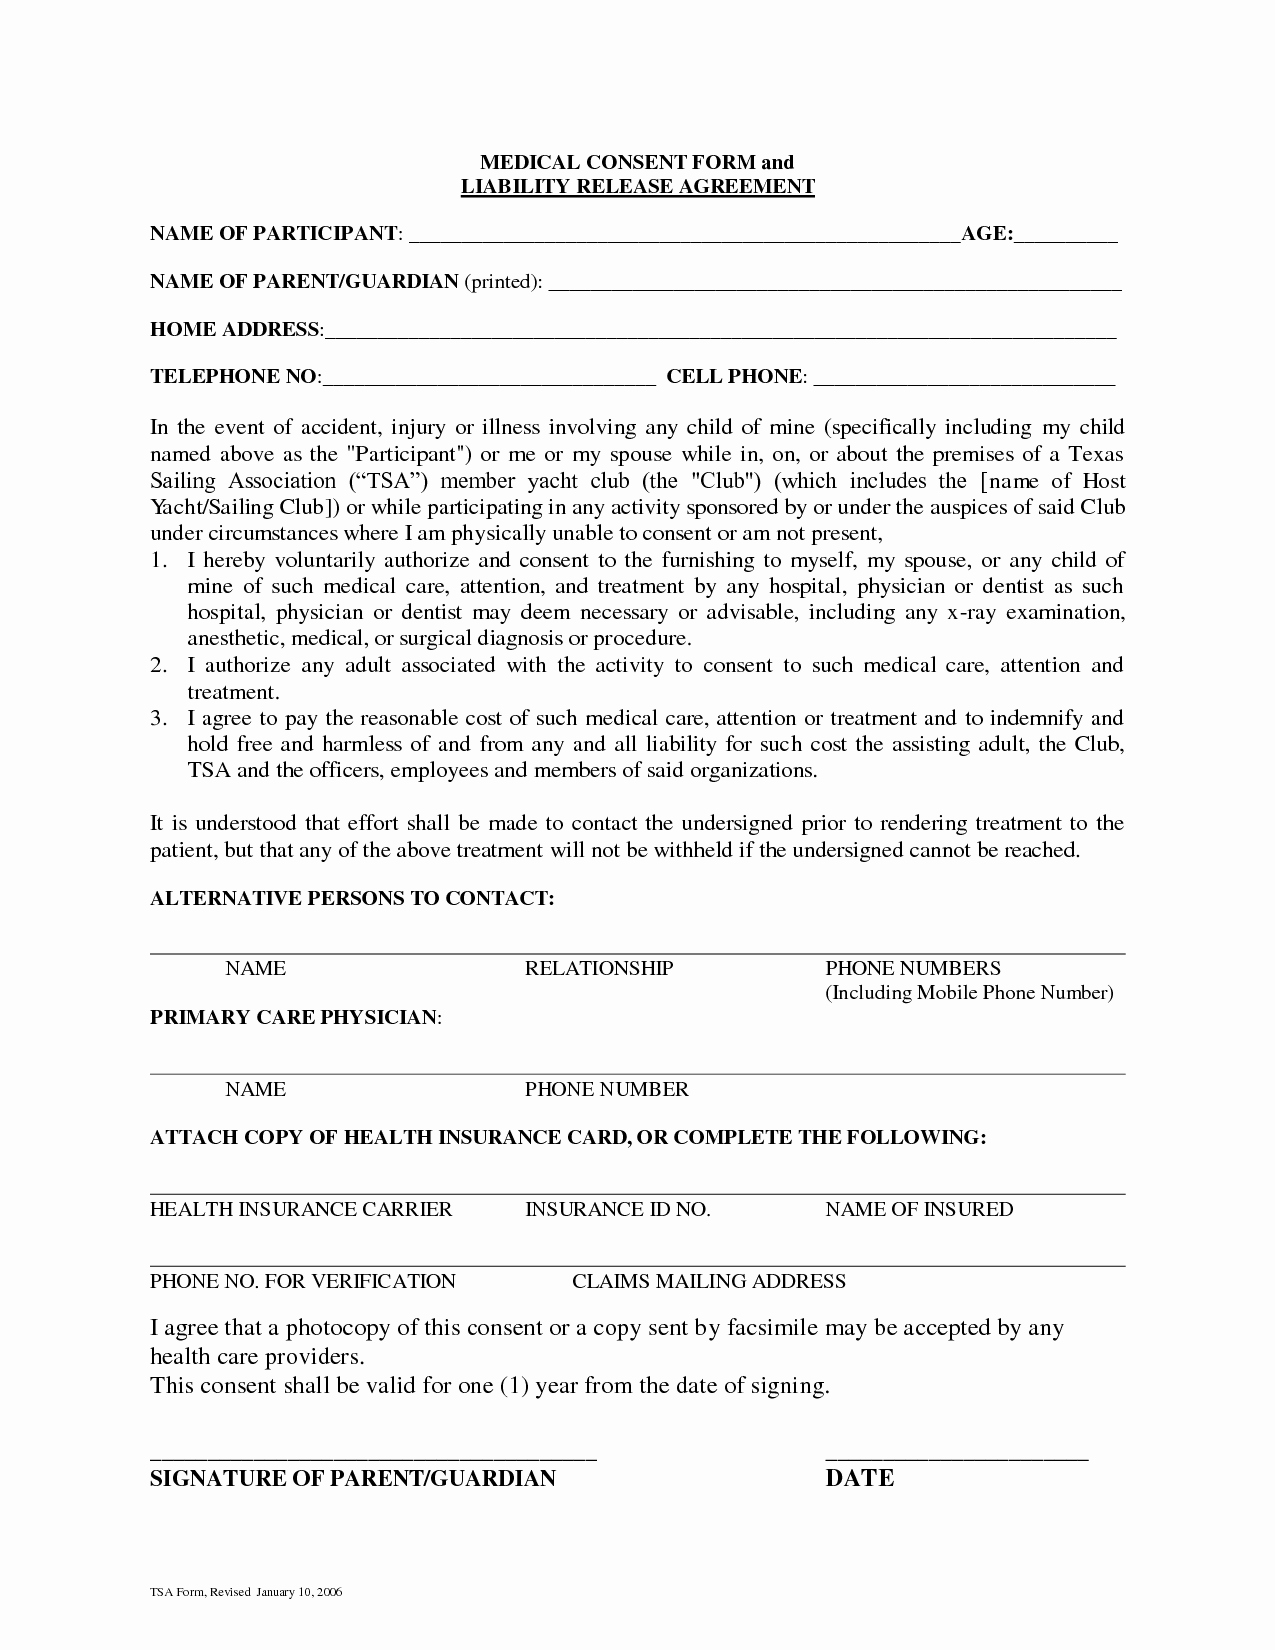 Video Consent form Template New Consent form to Release Medical Information Images